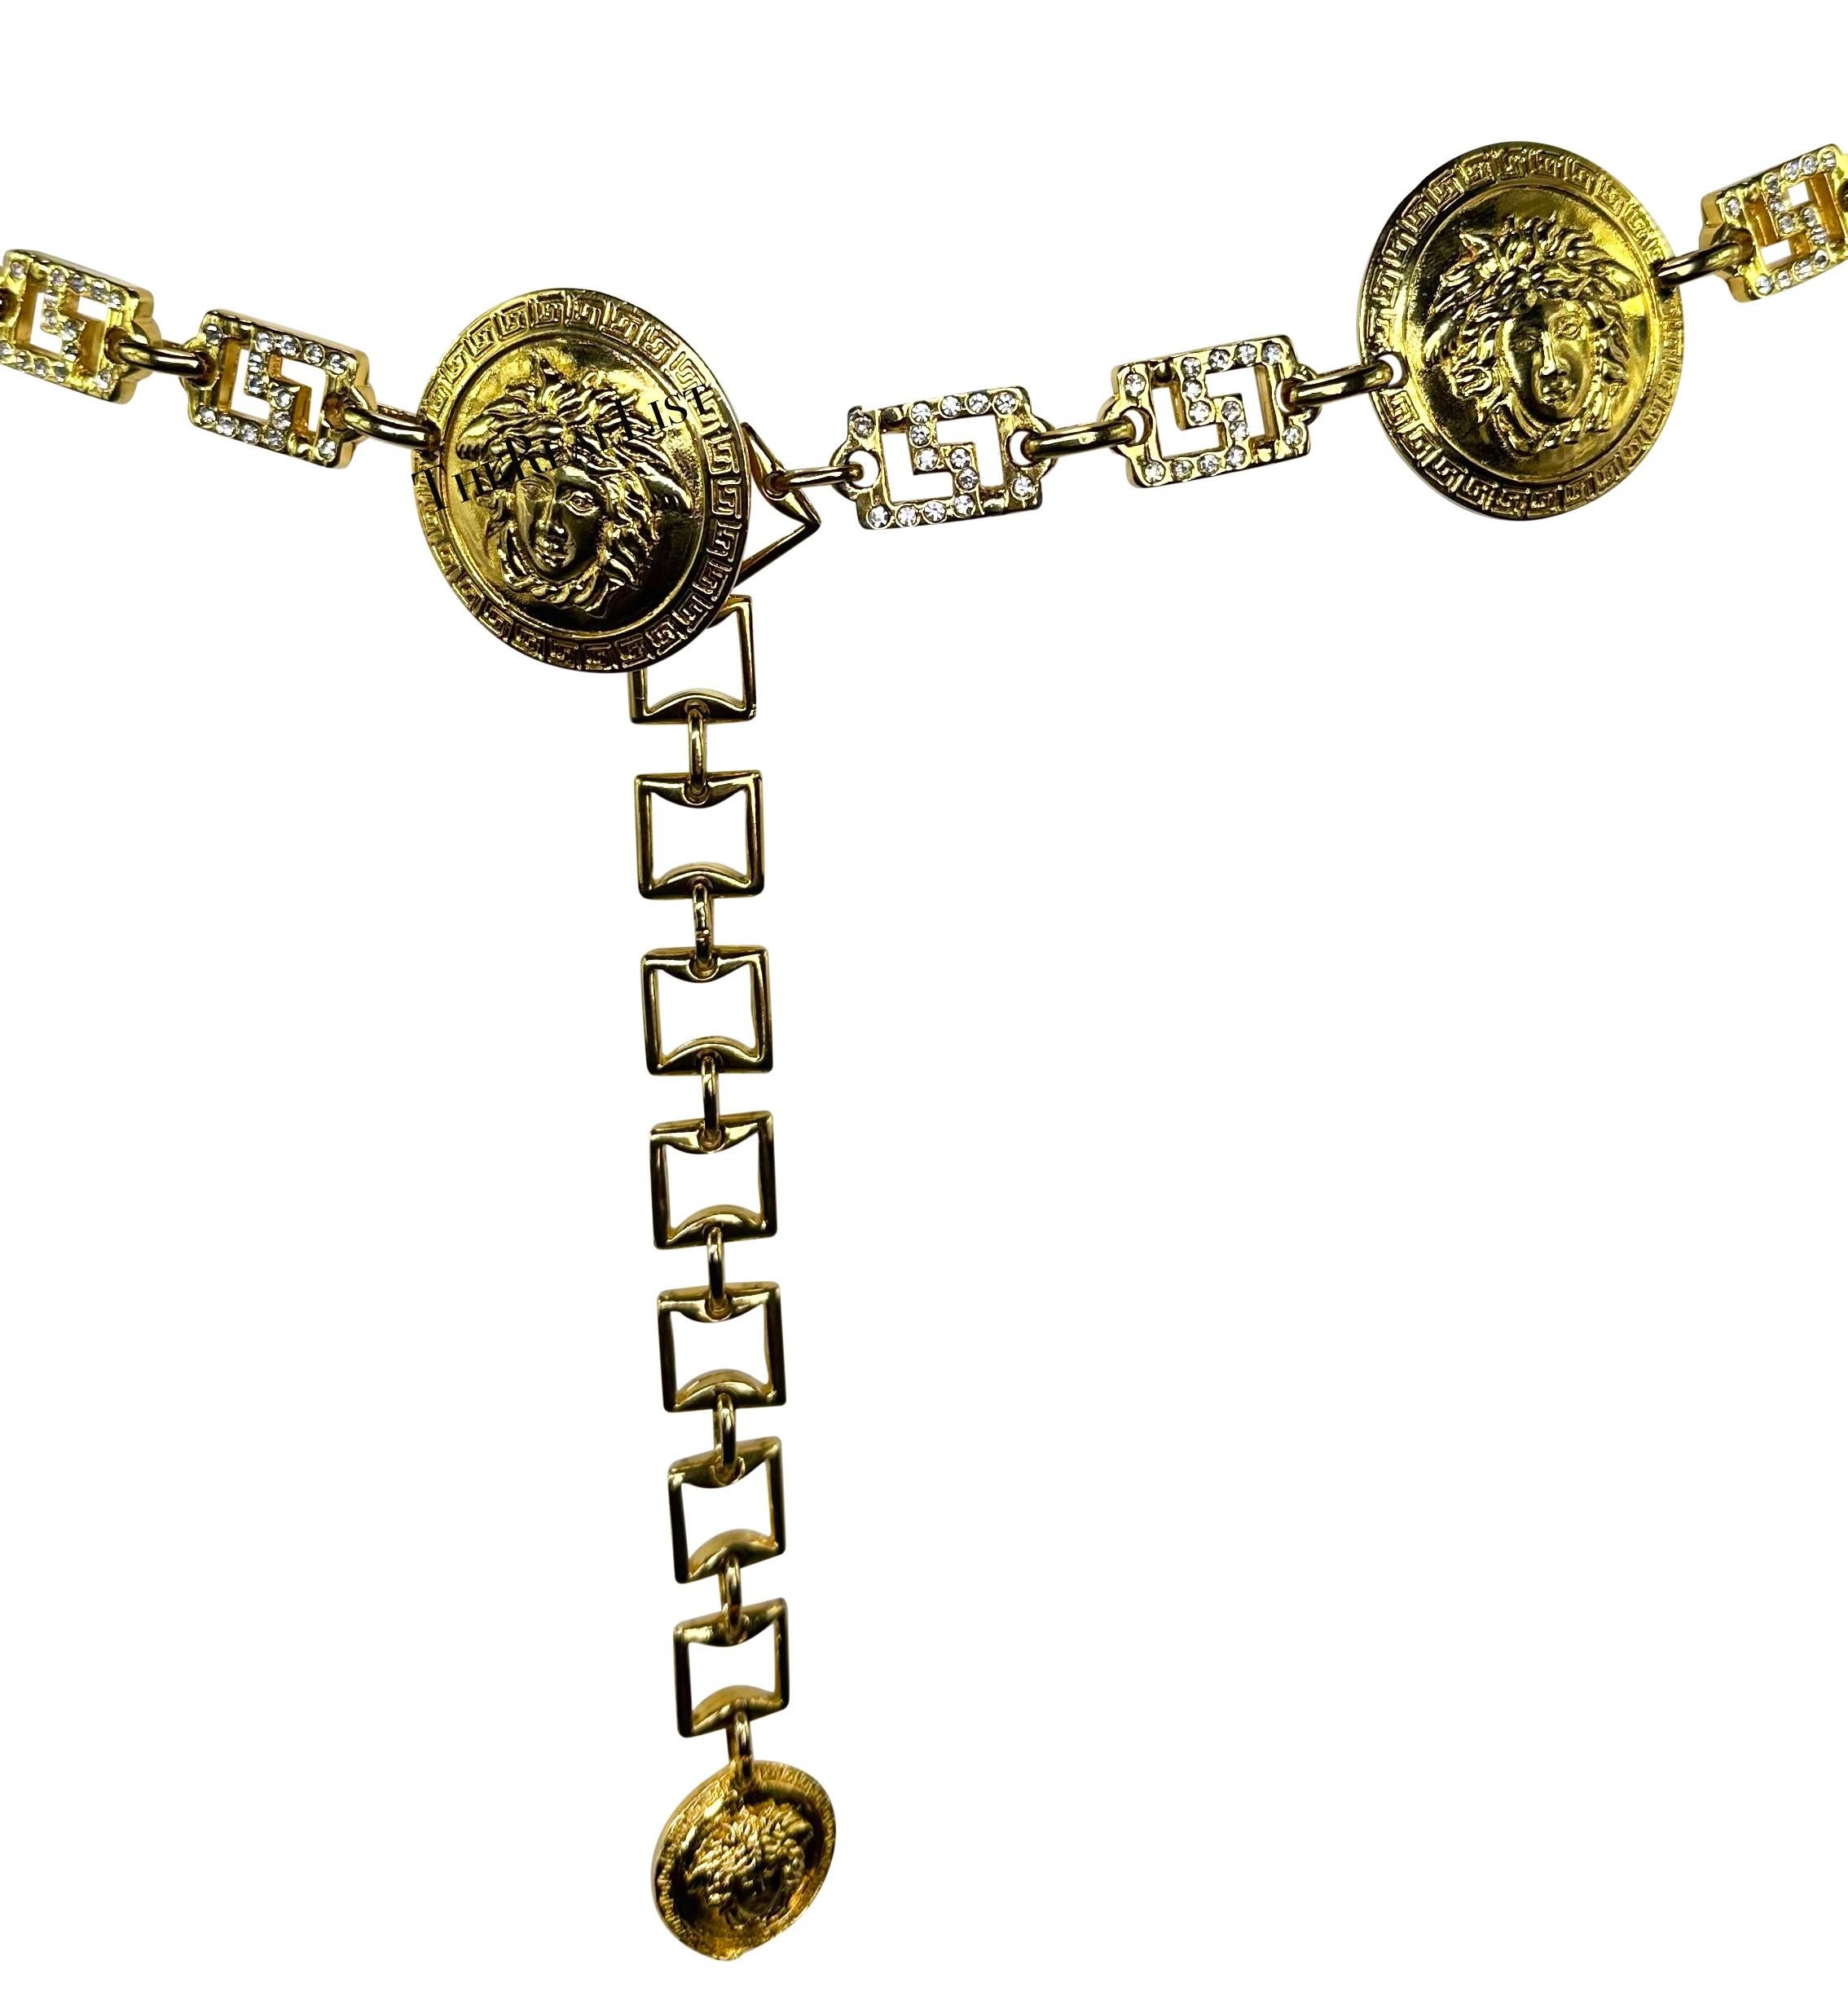 Presenting an incredible gold-tone Gianni Versace chain belt, designed by Gianni Versace. From the early 1990s, this incredibly rare and chic belt features gold-tone Greek key links accented with Versace Medusa medallions. This large Gianni Versace